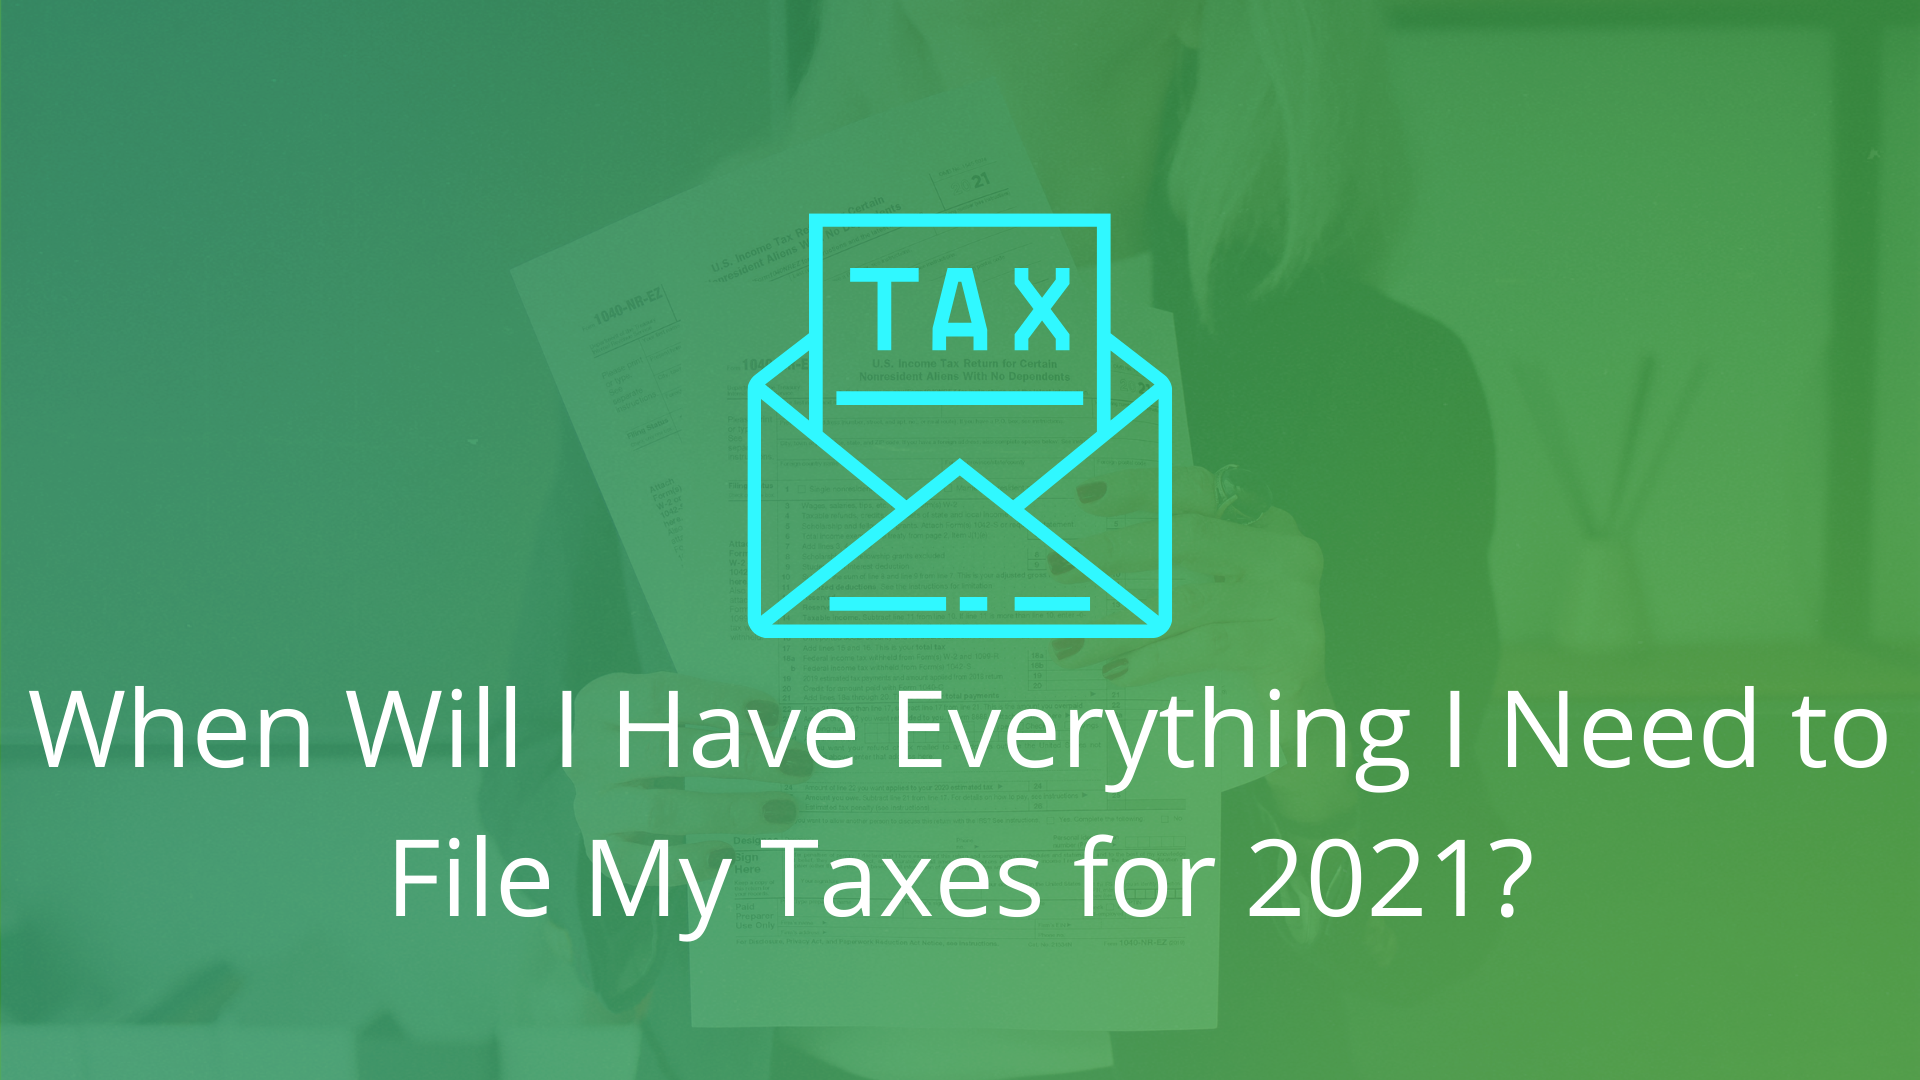 When Will I Have Everything I Need to File My Taxes for 2021?-Financial Symmetry, Inc.